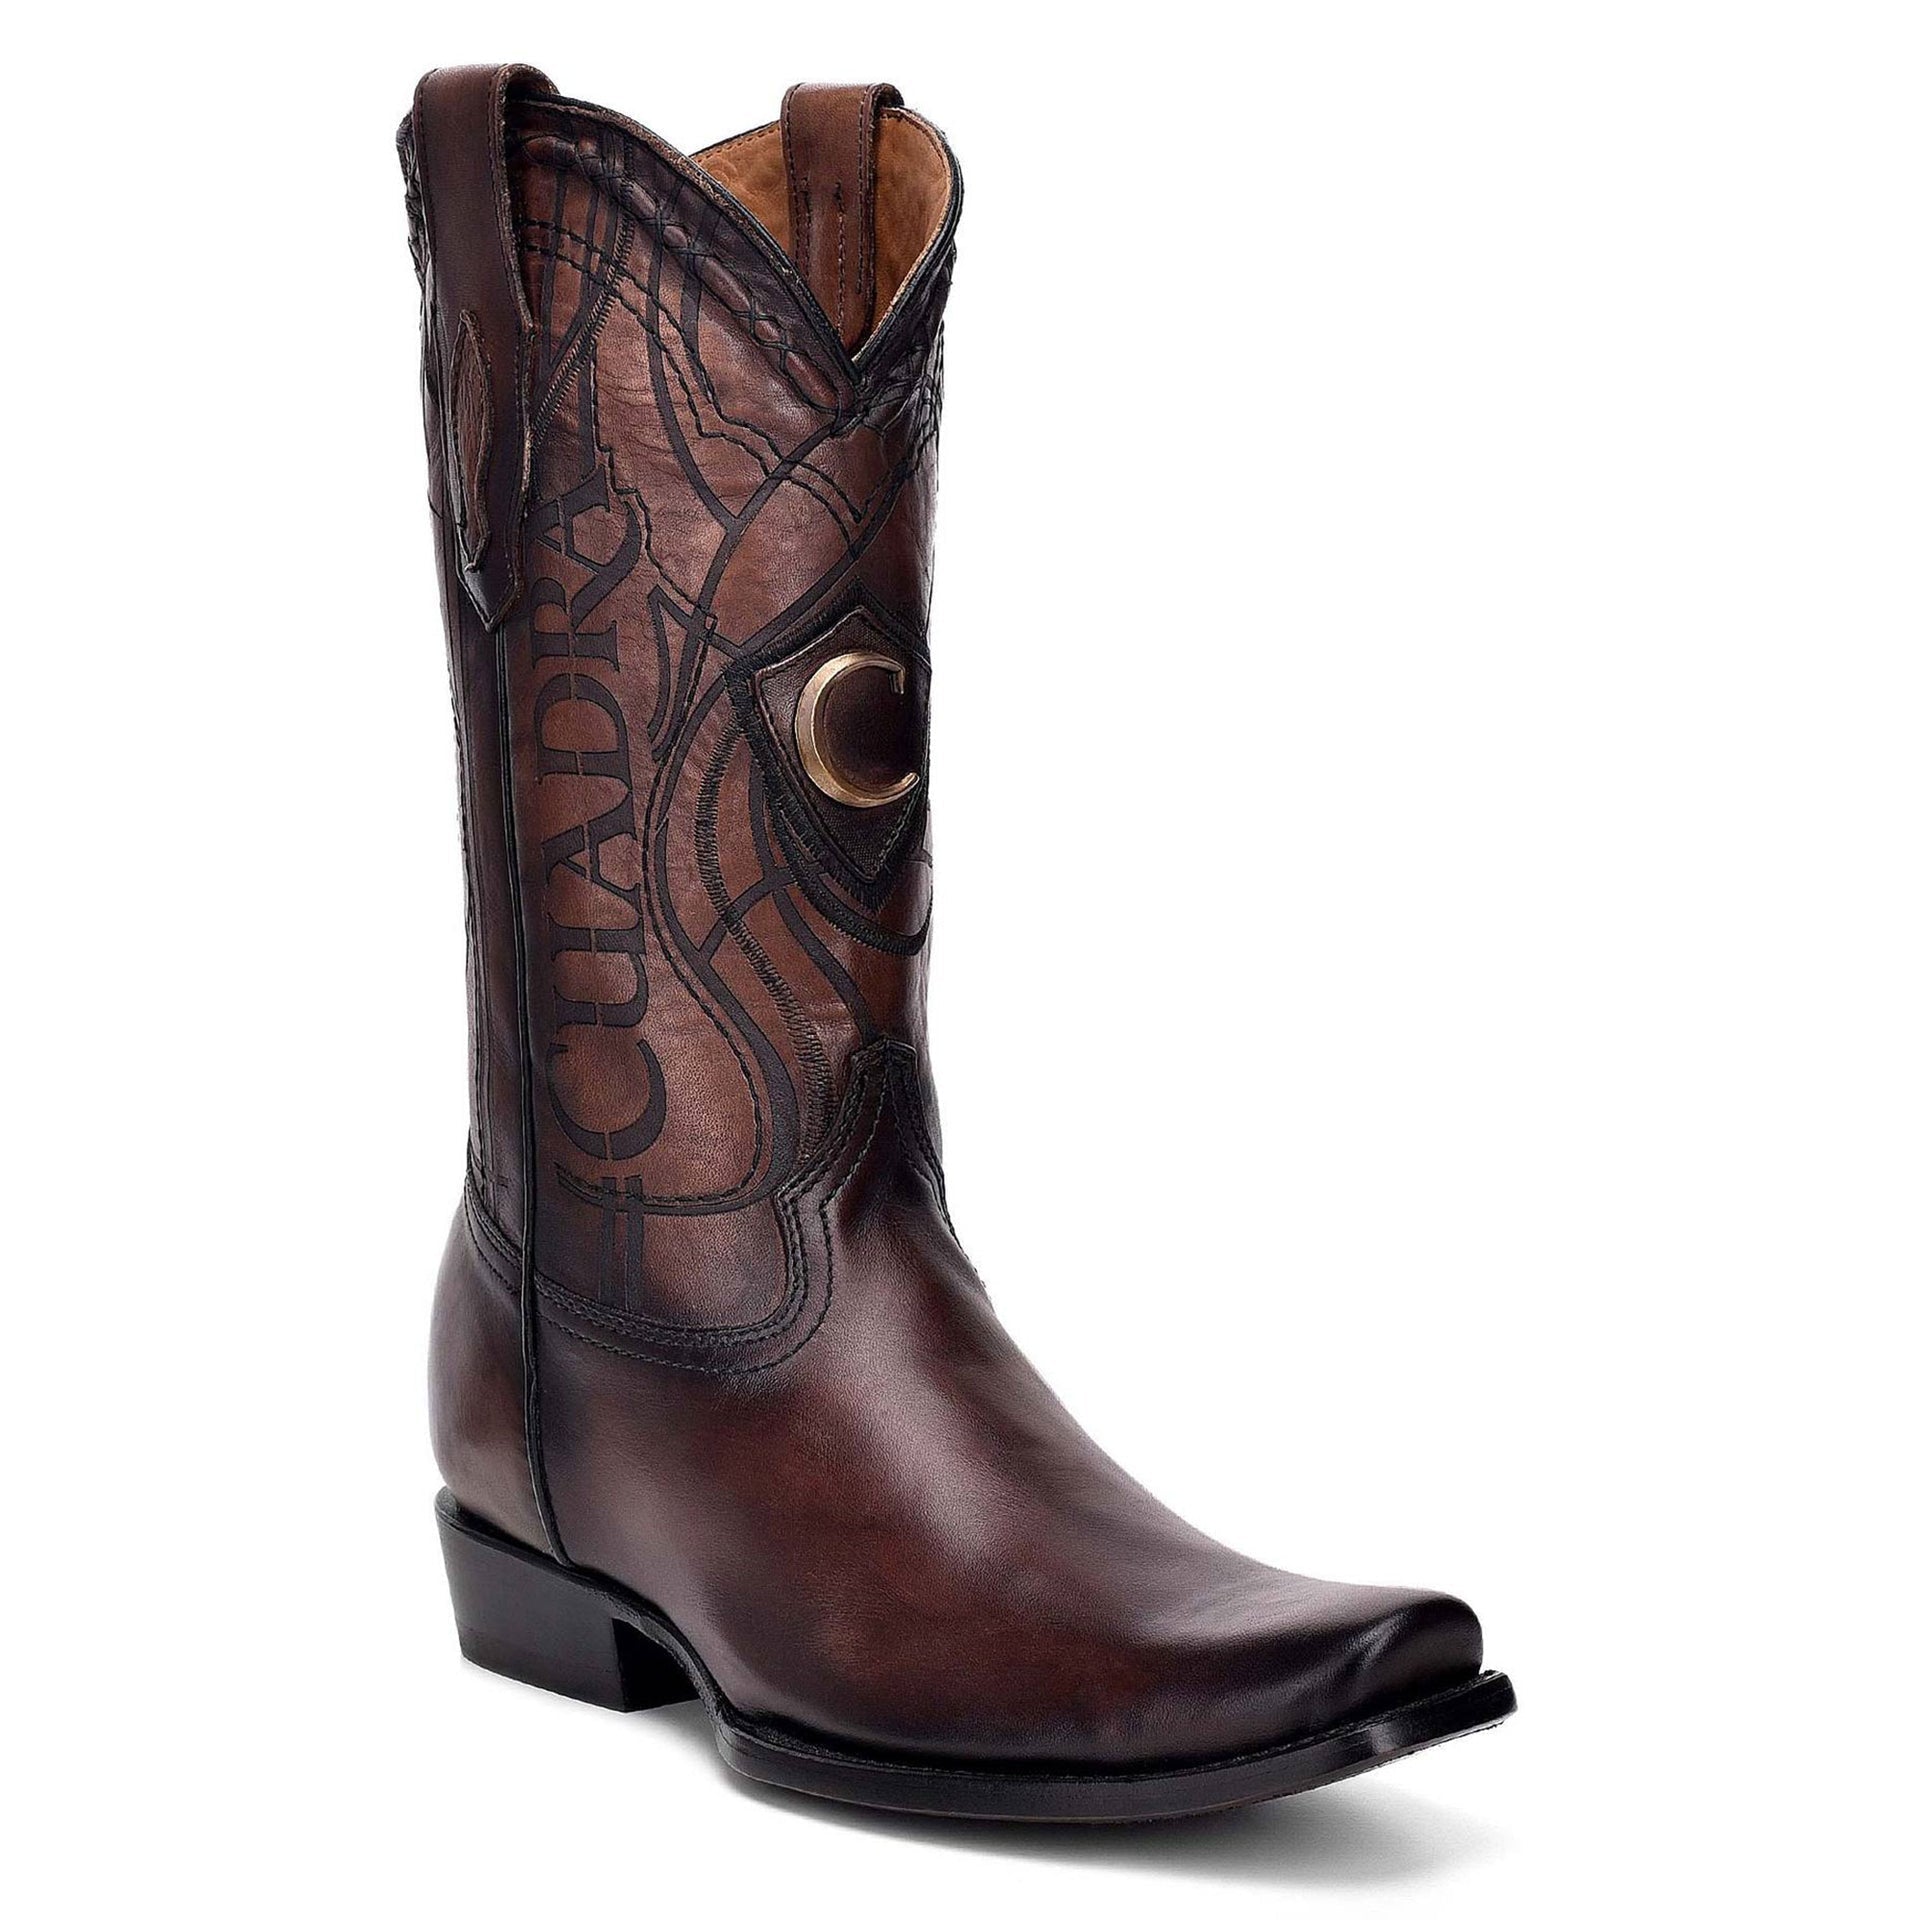 1J1NRS - Cuadra brown western cowboy cowhide leather boots for men-Kuet.us